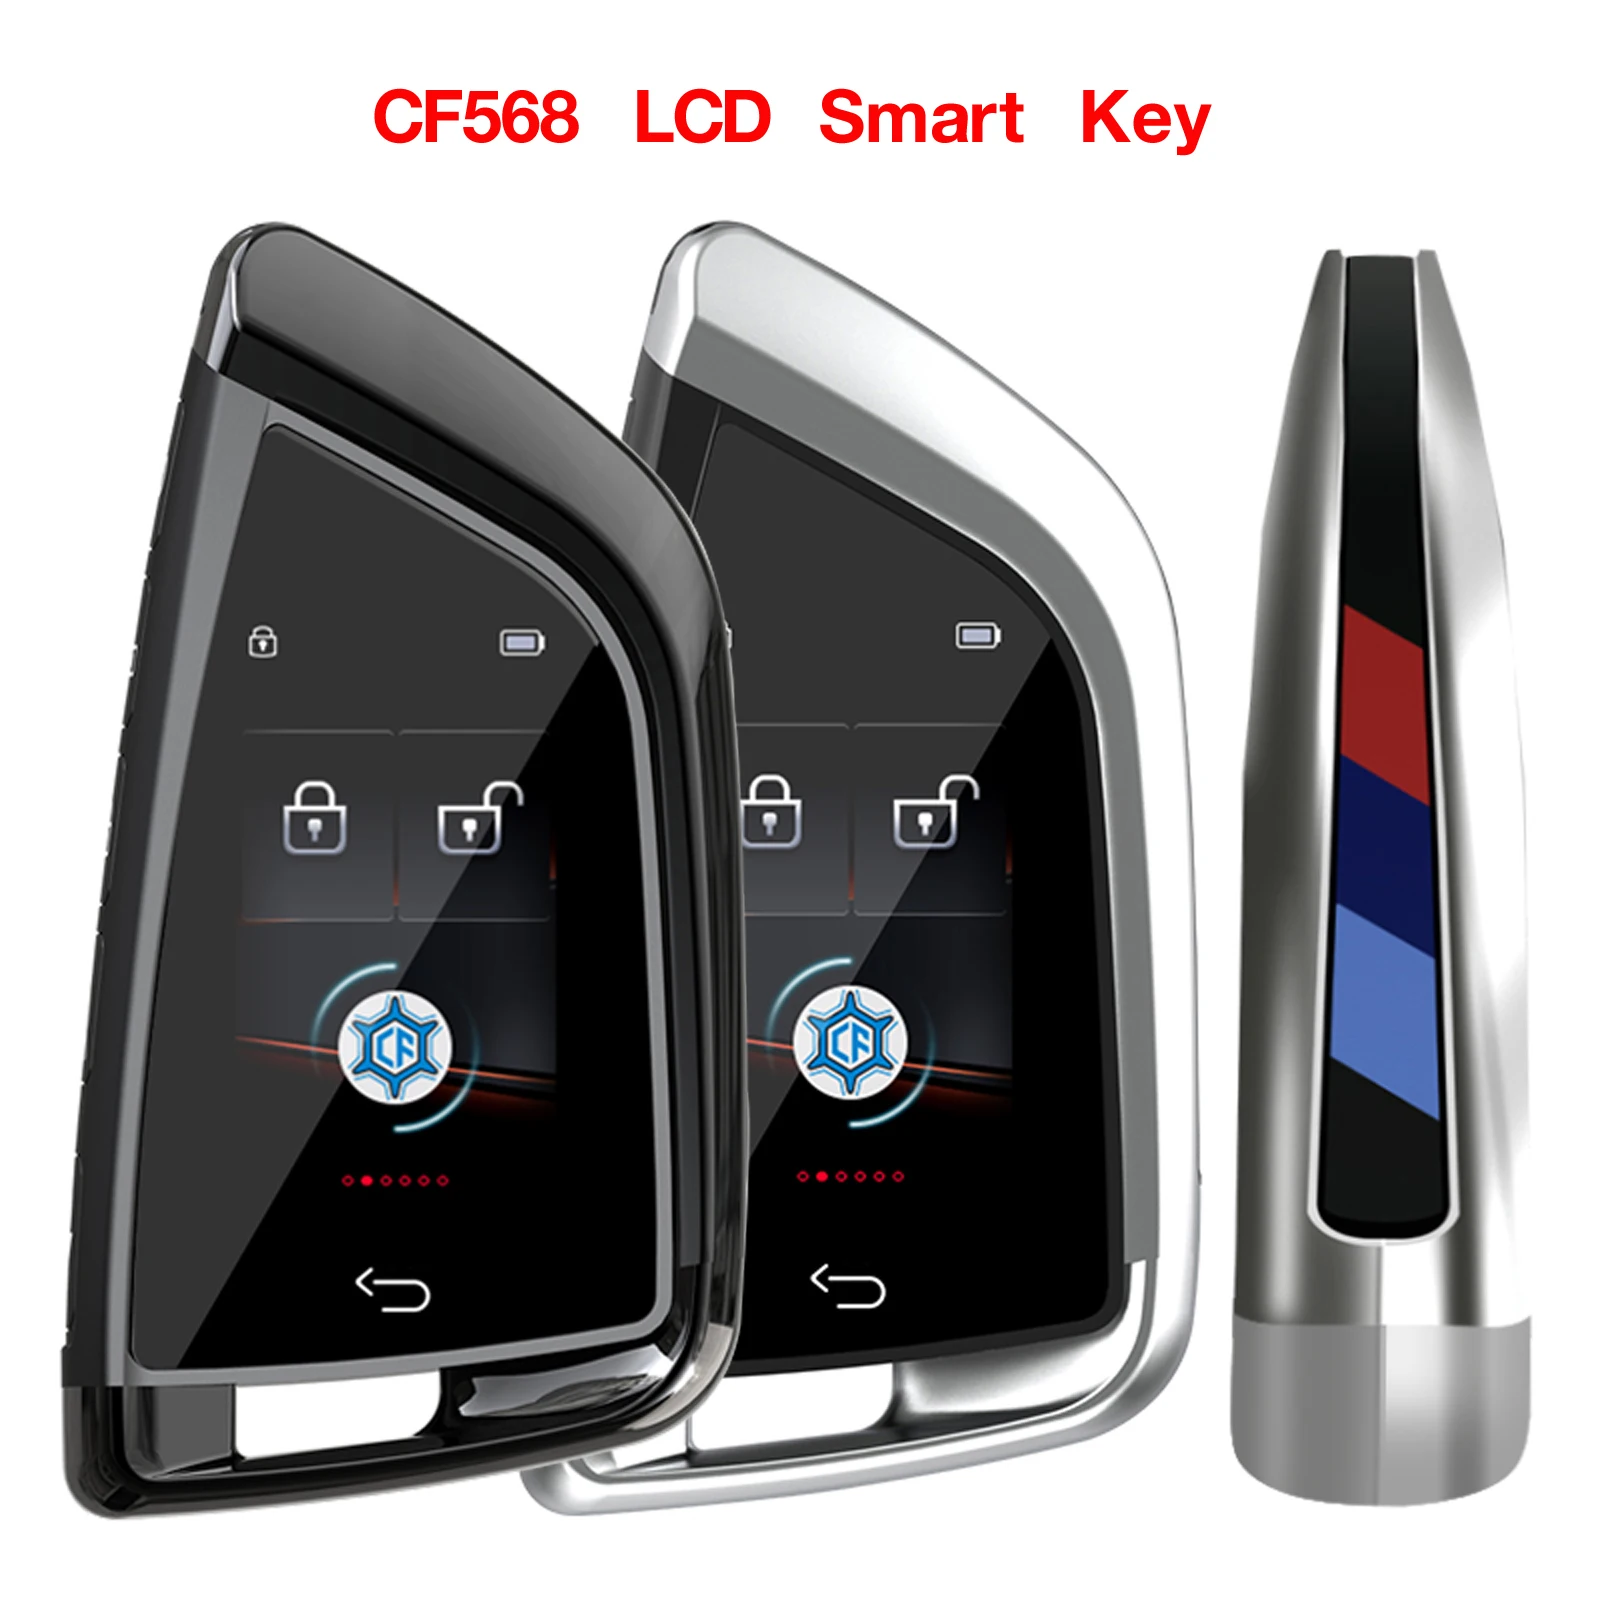 jingyuqin English CF568 Universal Modified LCD Smart Key For BMW For Kia For Benz For Ford Keyless Entry Automati Door Lock